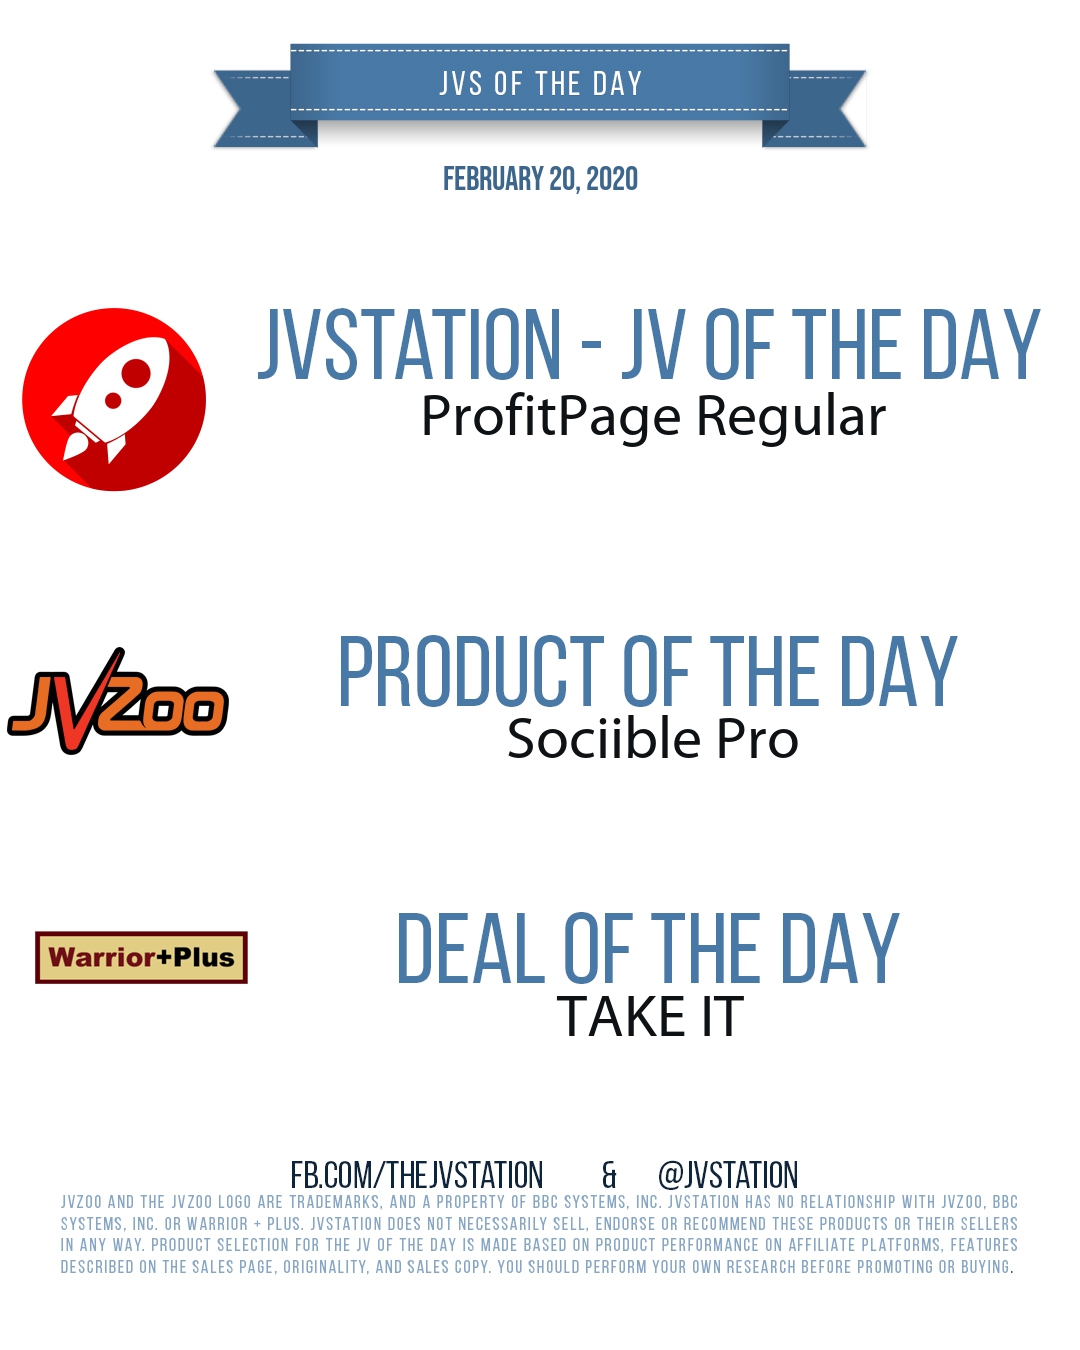 JVs of the day - February 20, 2020